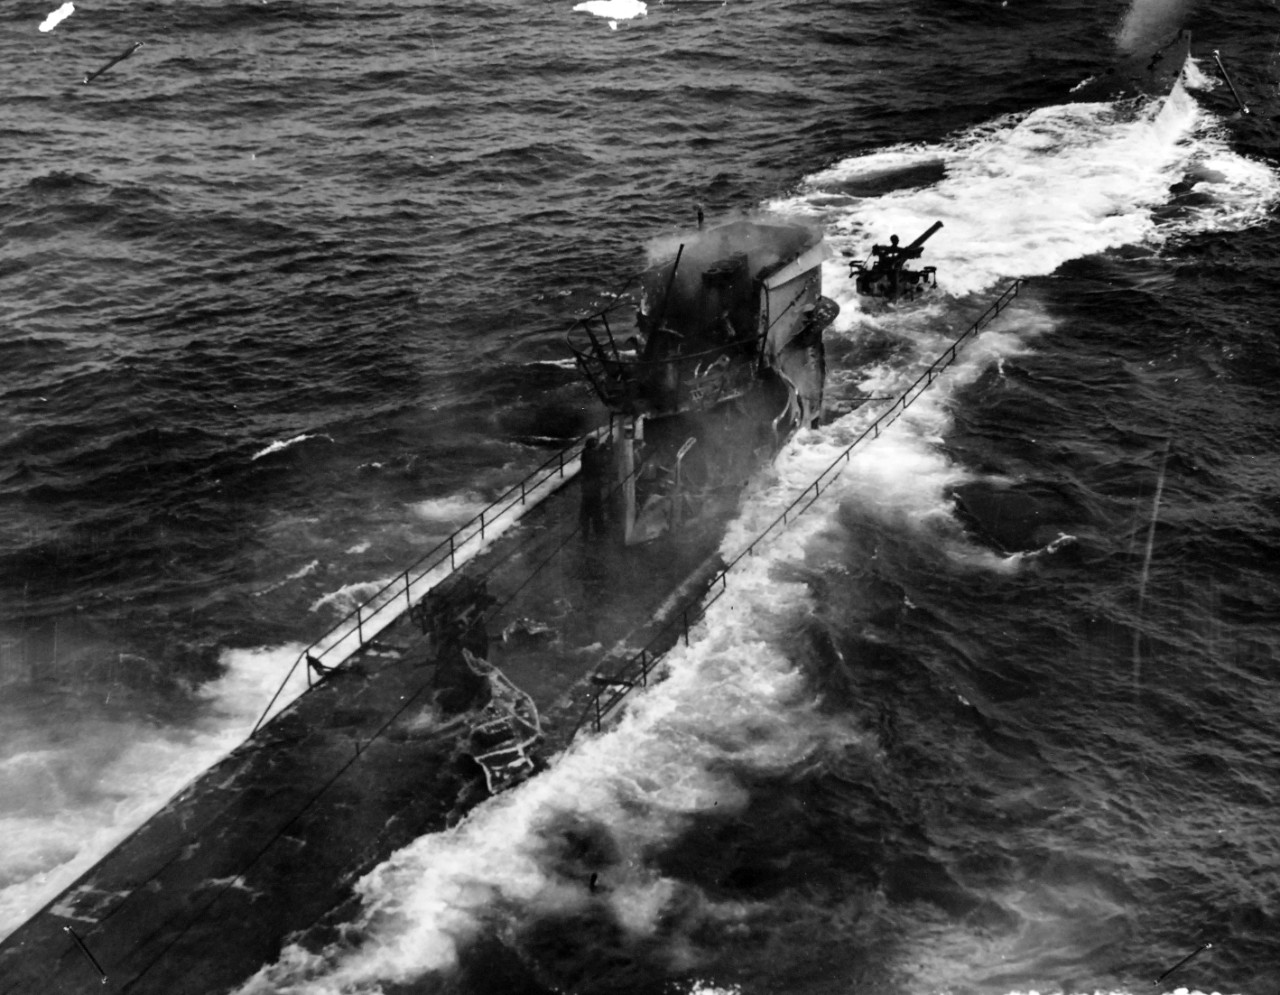 26-G-1512:  Sinking of German submarine U-175, April 1943.   The submarine was sunk off south-west of Ireland by USCGC Spencer (WPG-36) on April 17, 1943.  .  Original caption, “NAZI SUBMARINE SUNK BY THE FAMED CUTTER USCGC SPENCER (WPG-36): Effect of the U.S. Coast Guard Cutter USCGC SPENCER (WPG-36)'S fire are visible in this close-up shot of the U-Boat, taken as the battle raged.  The Nazi standing by the stanchion amidships disappeared a moment after this picture was taken by a Coast Guard photographer.  The U-Boat had been trying to sneak into the center of the convoy.”  Official U.S. Coast Guard Photograph, now in the collections of the National Archives.  (2017/09/05).